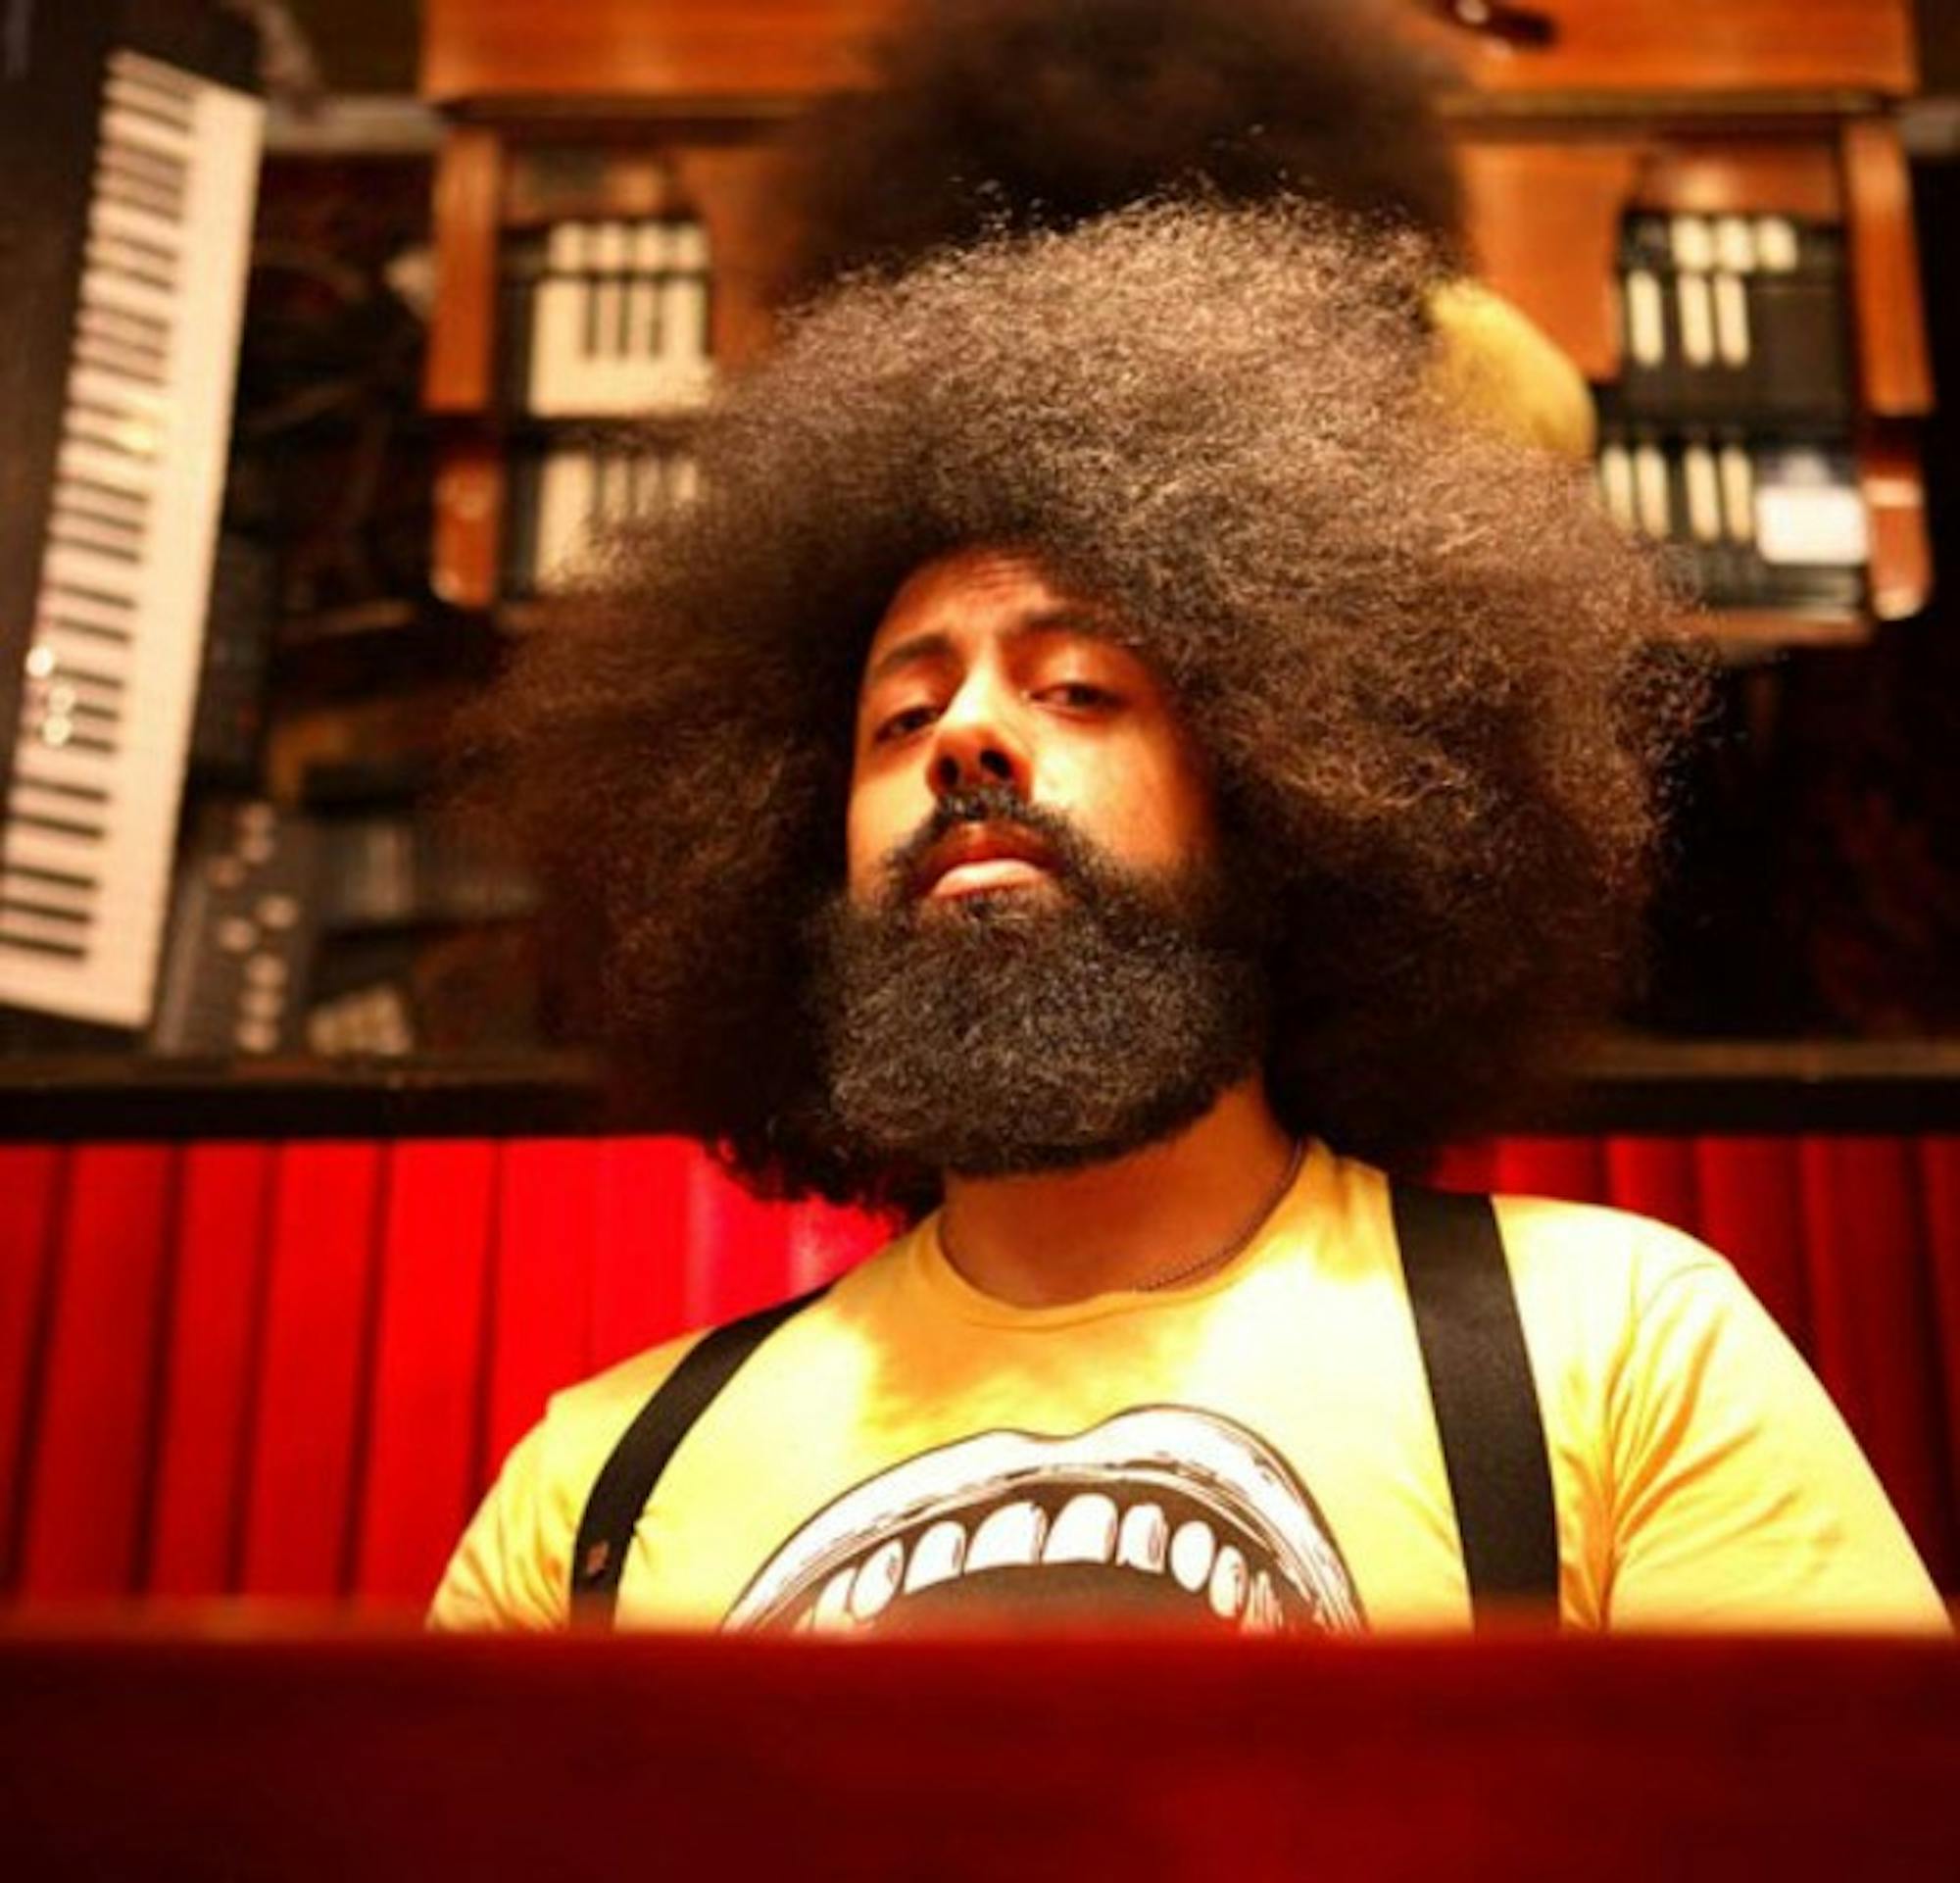 Popular comedian Reggie Watts, who will perform this Saturday night, has given a TED talk and created a parody of Radiohead.